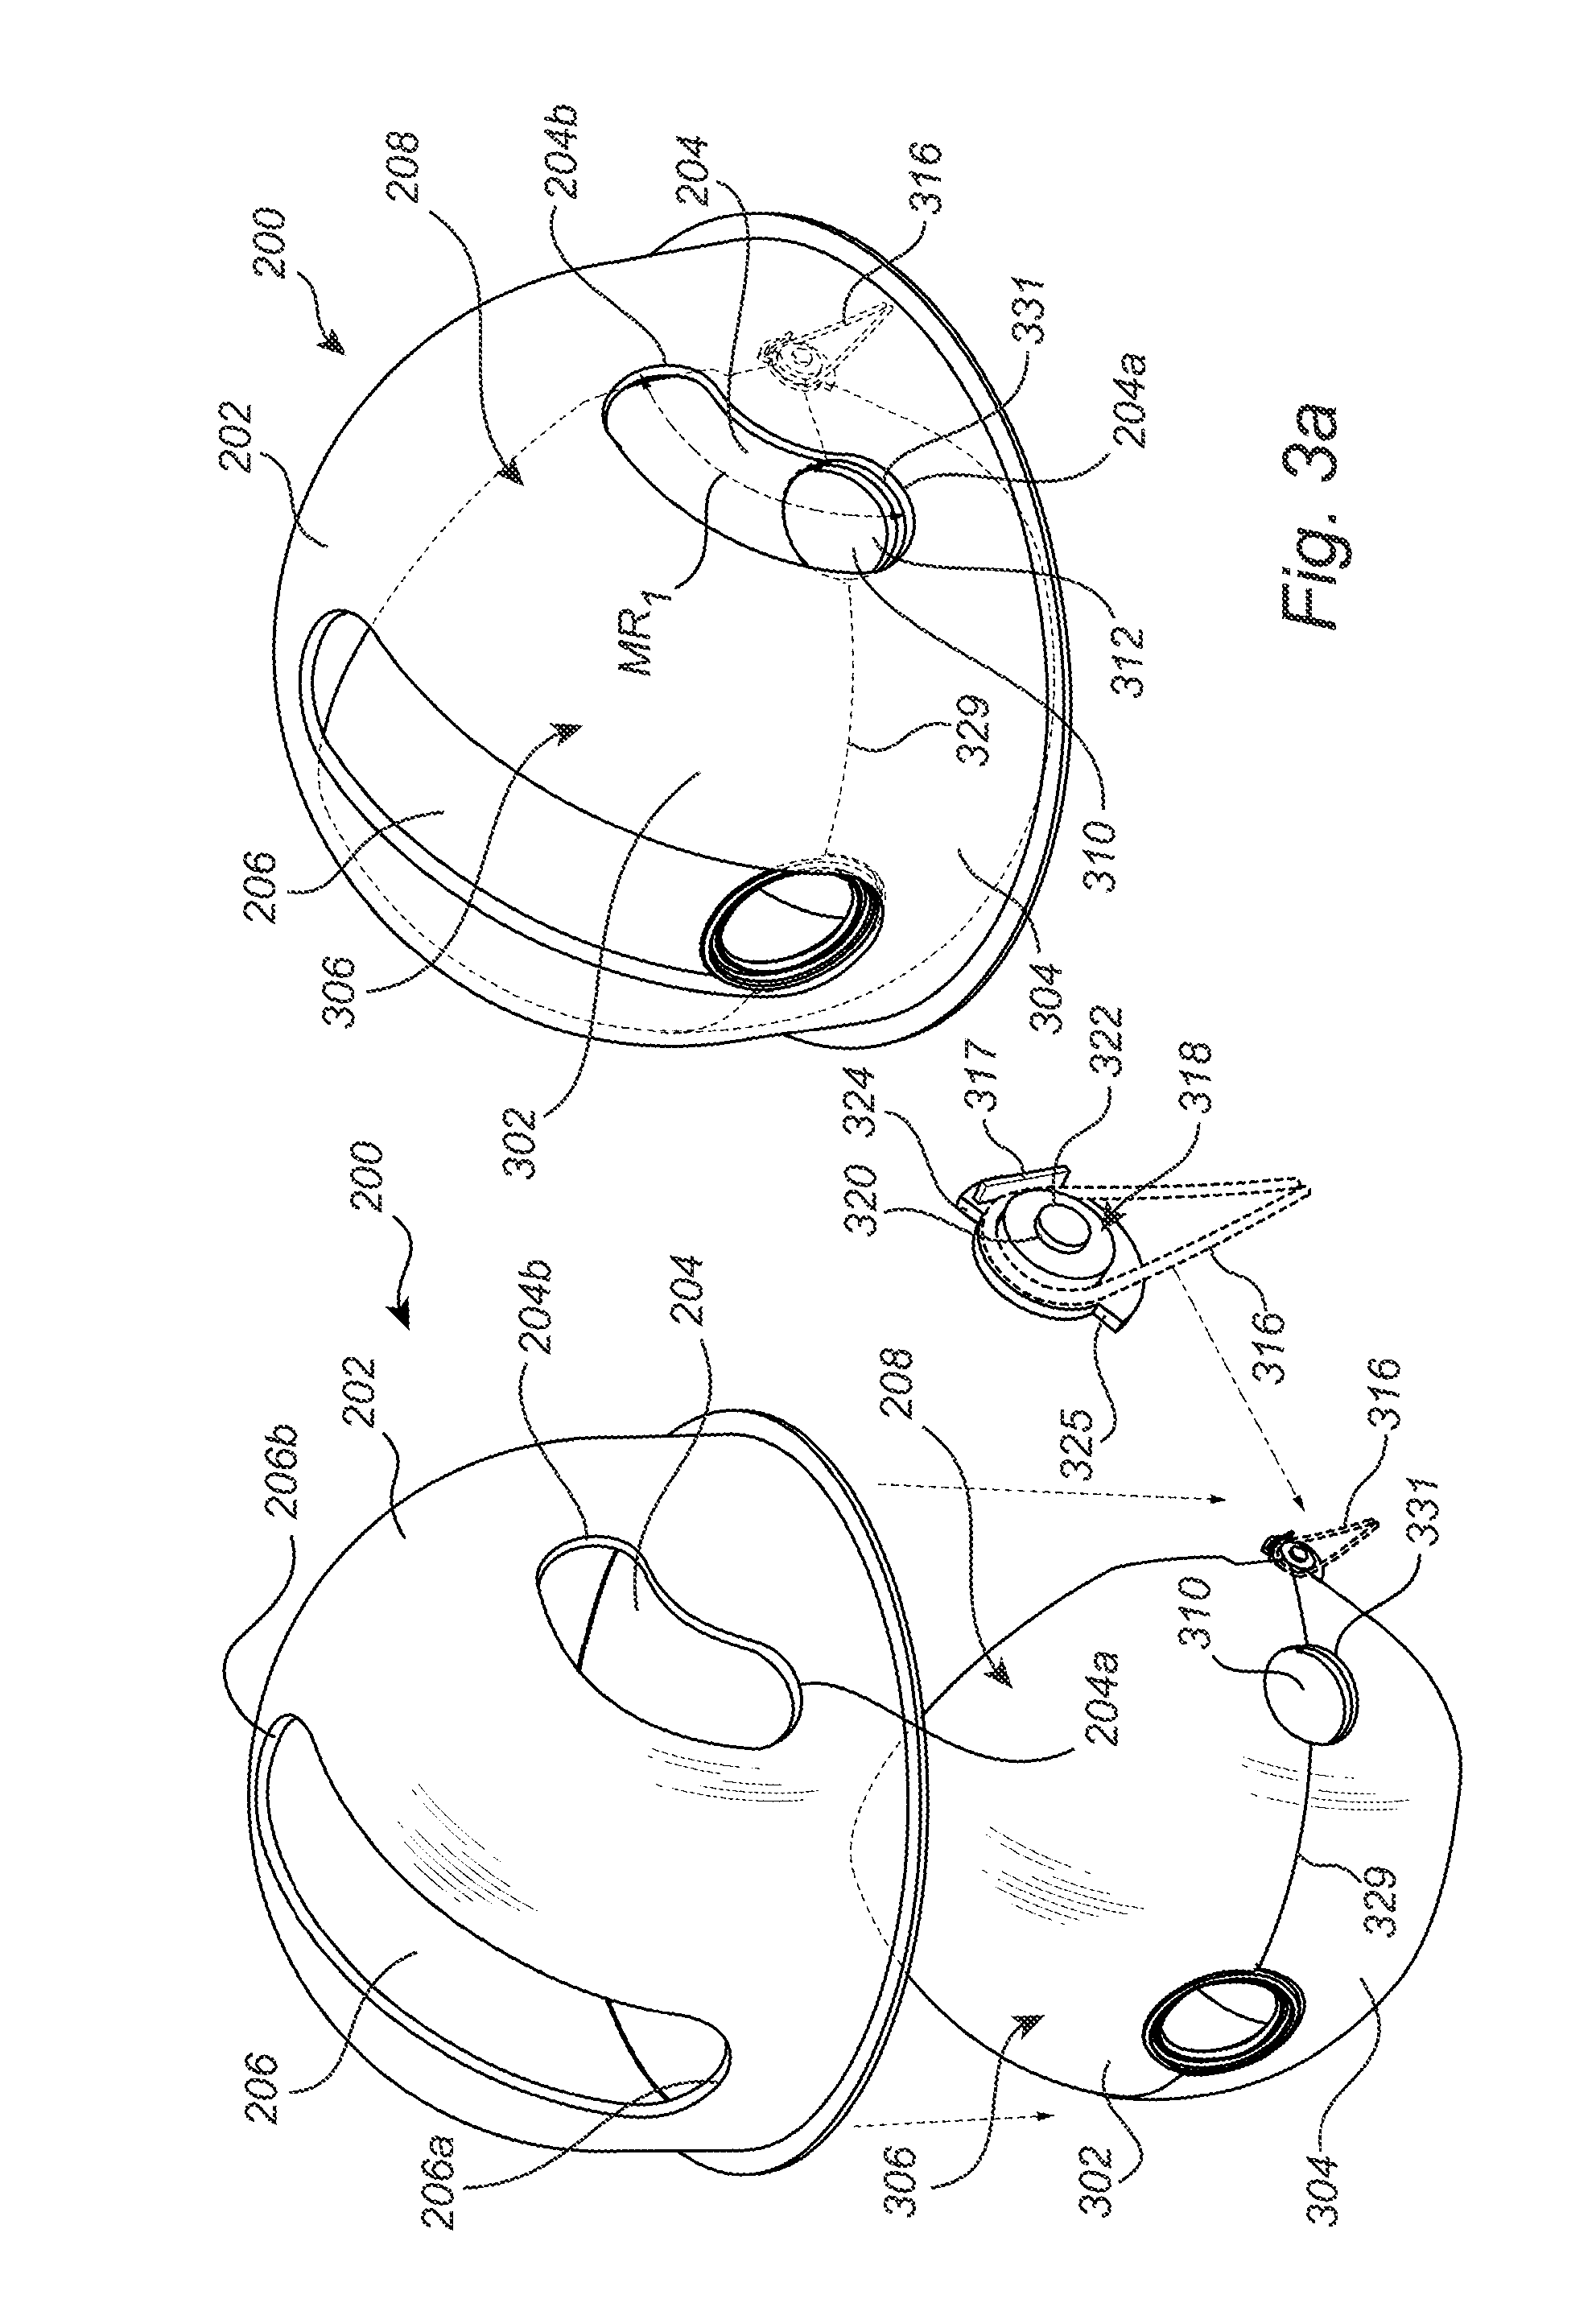 Arrangement for a monitoring camera device